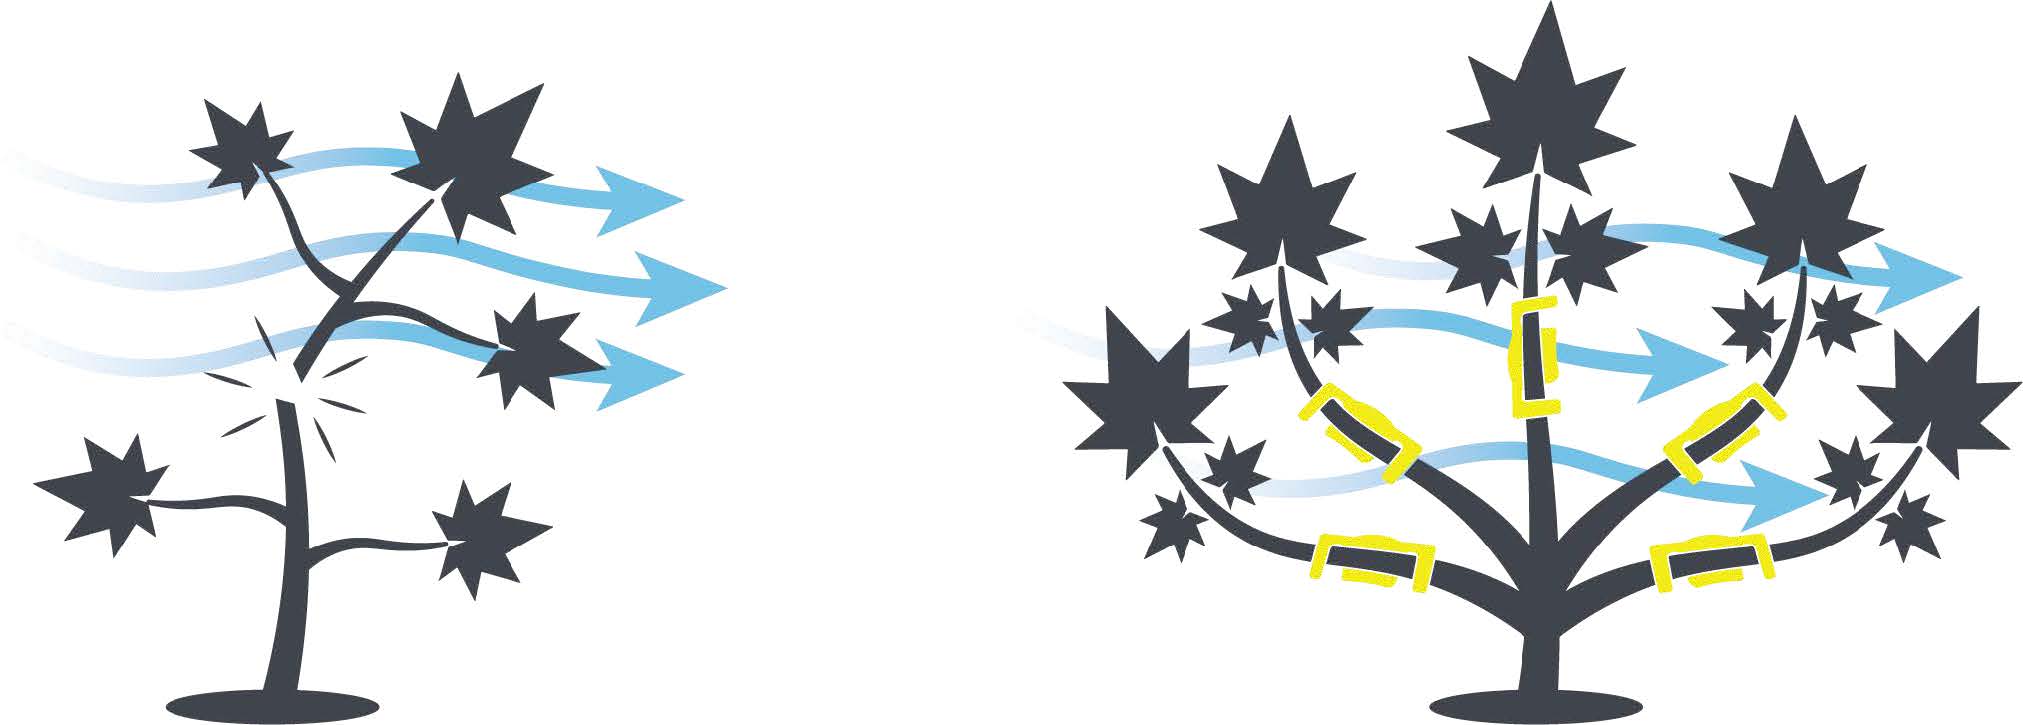 A comparison diagram showing two cannabis plants. The plant on the left, with minimal foliage, has blue arrows indicating airflow but lacks structure and support. The plant on the right, with more foliage and yellow clips, shows improved airflow with blue arrows and better branch support and spacing.